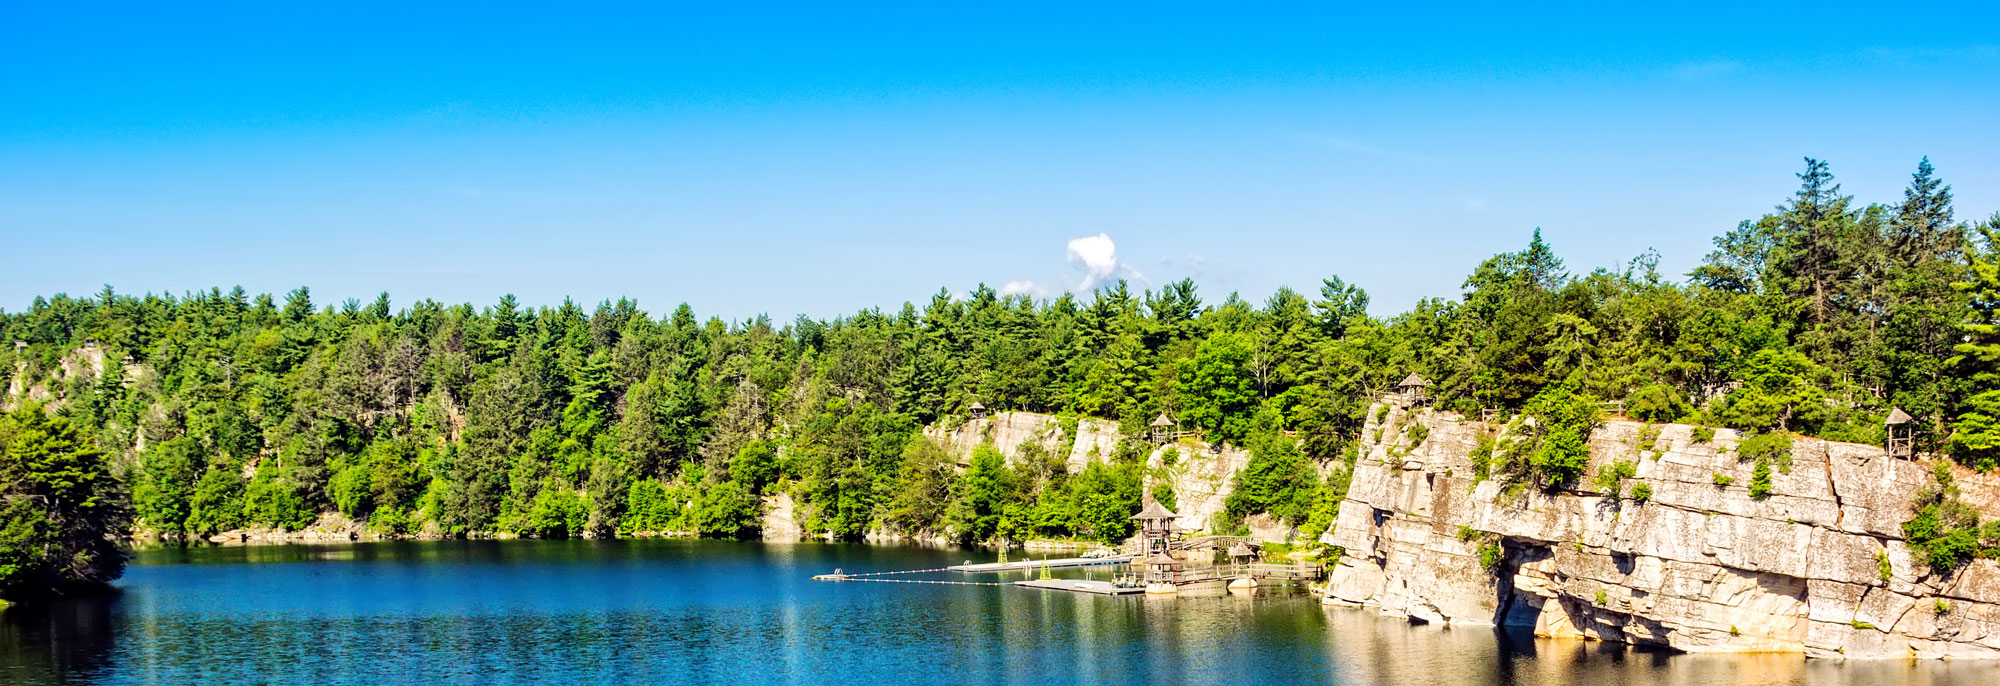 shot of the Mohonk Lake in a summer day